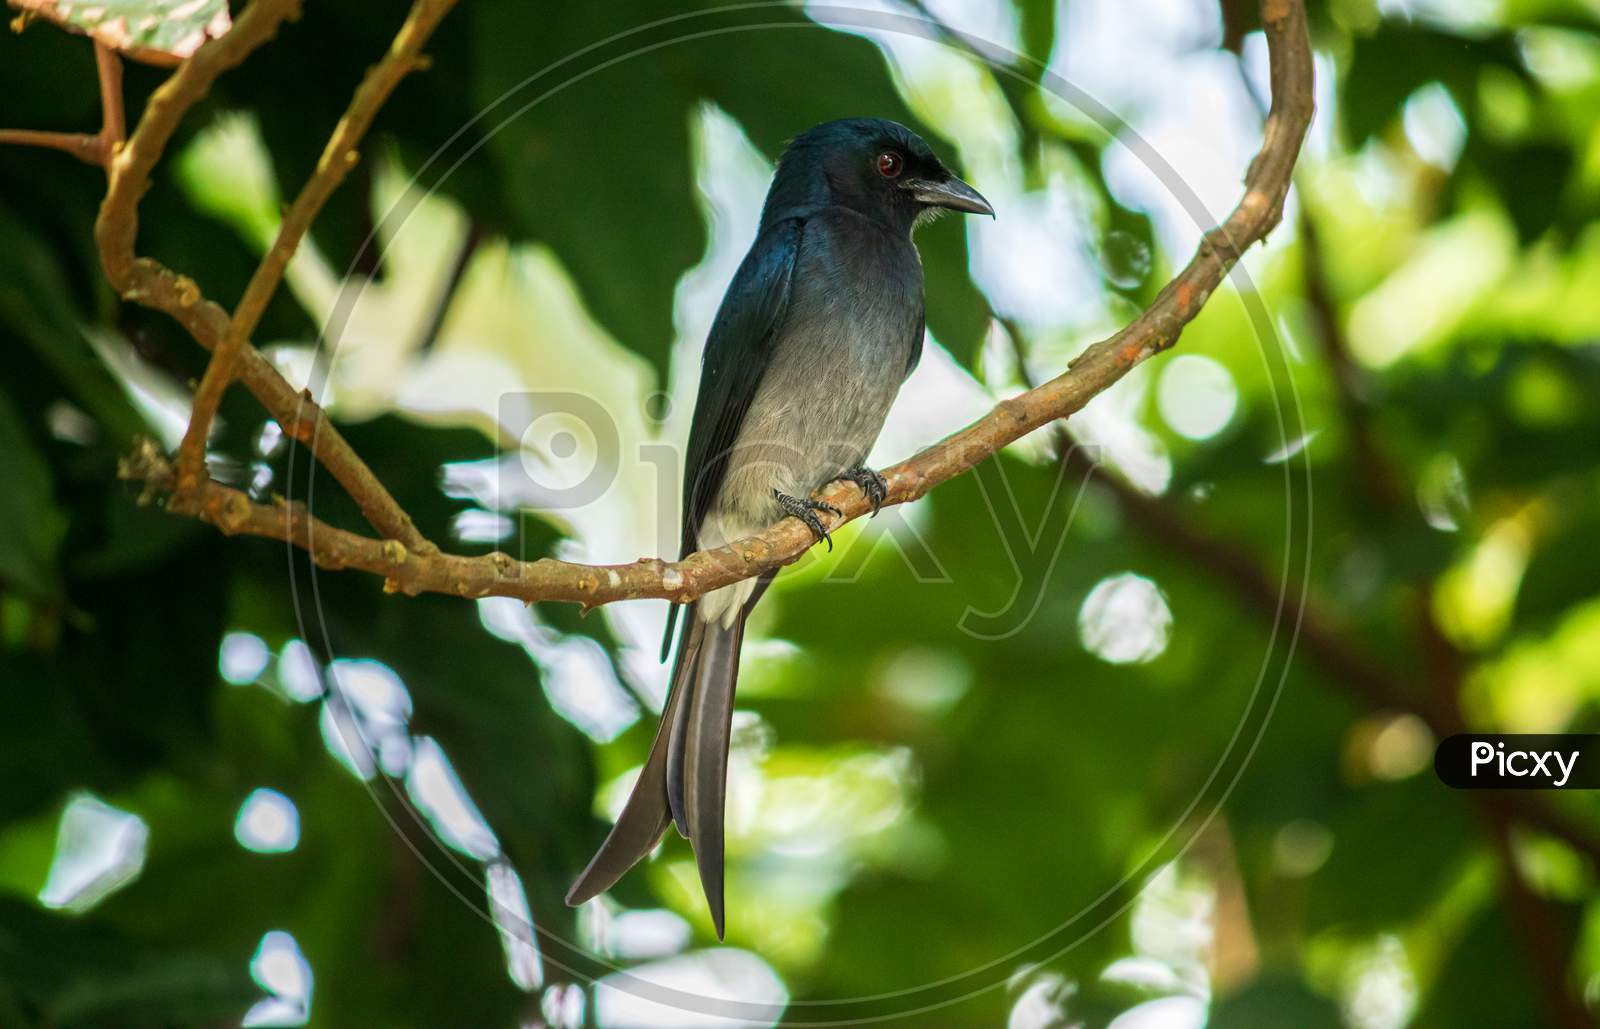 Common Black Drongo Bird Perched Under The Shade Of A Tree, Looking So Proud, Pose For A Photograph, Has Shiny Dark Color Feathers And A Long Split Tail.